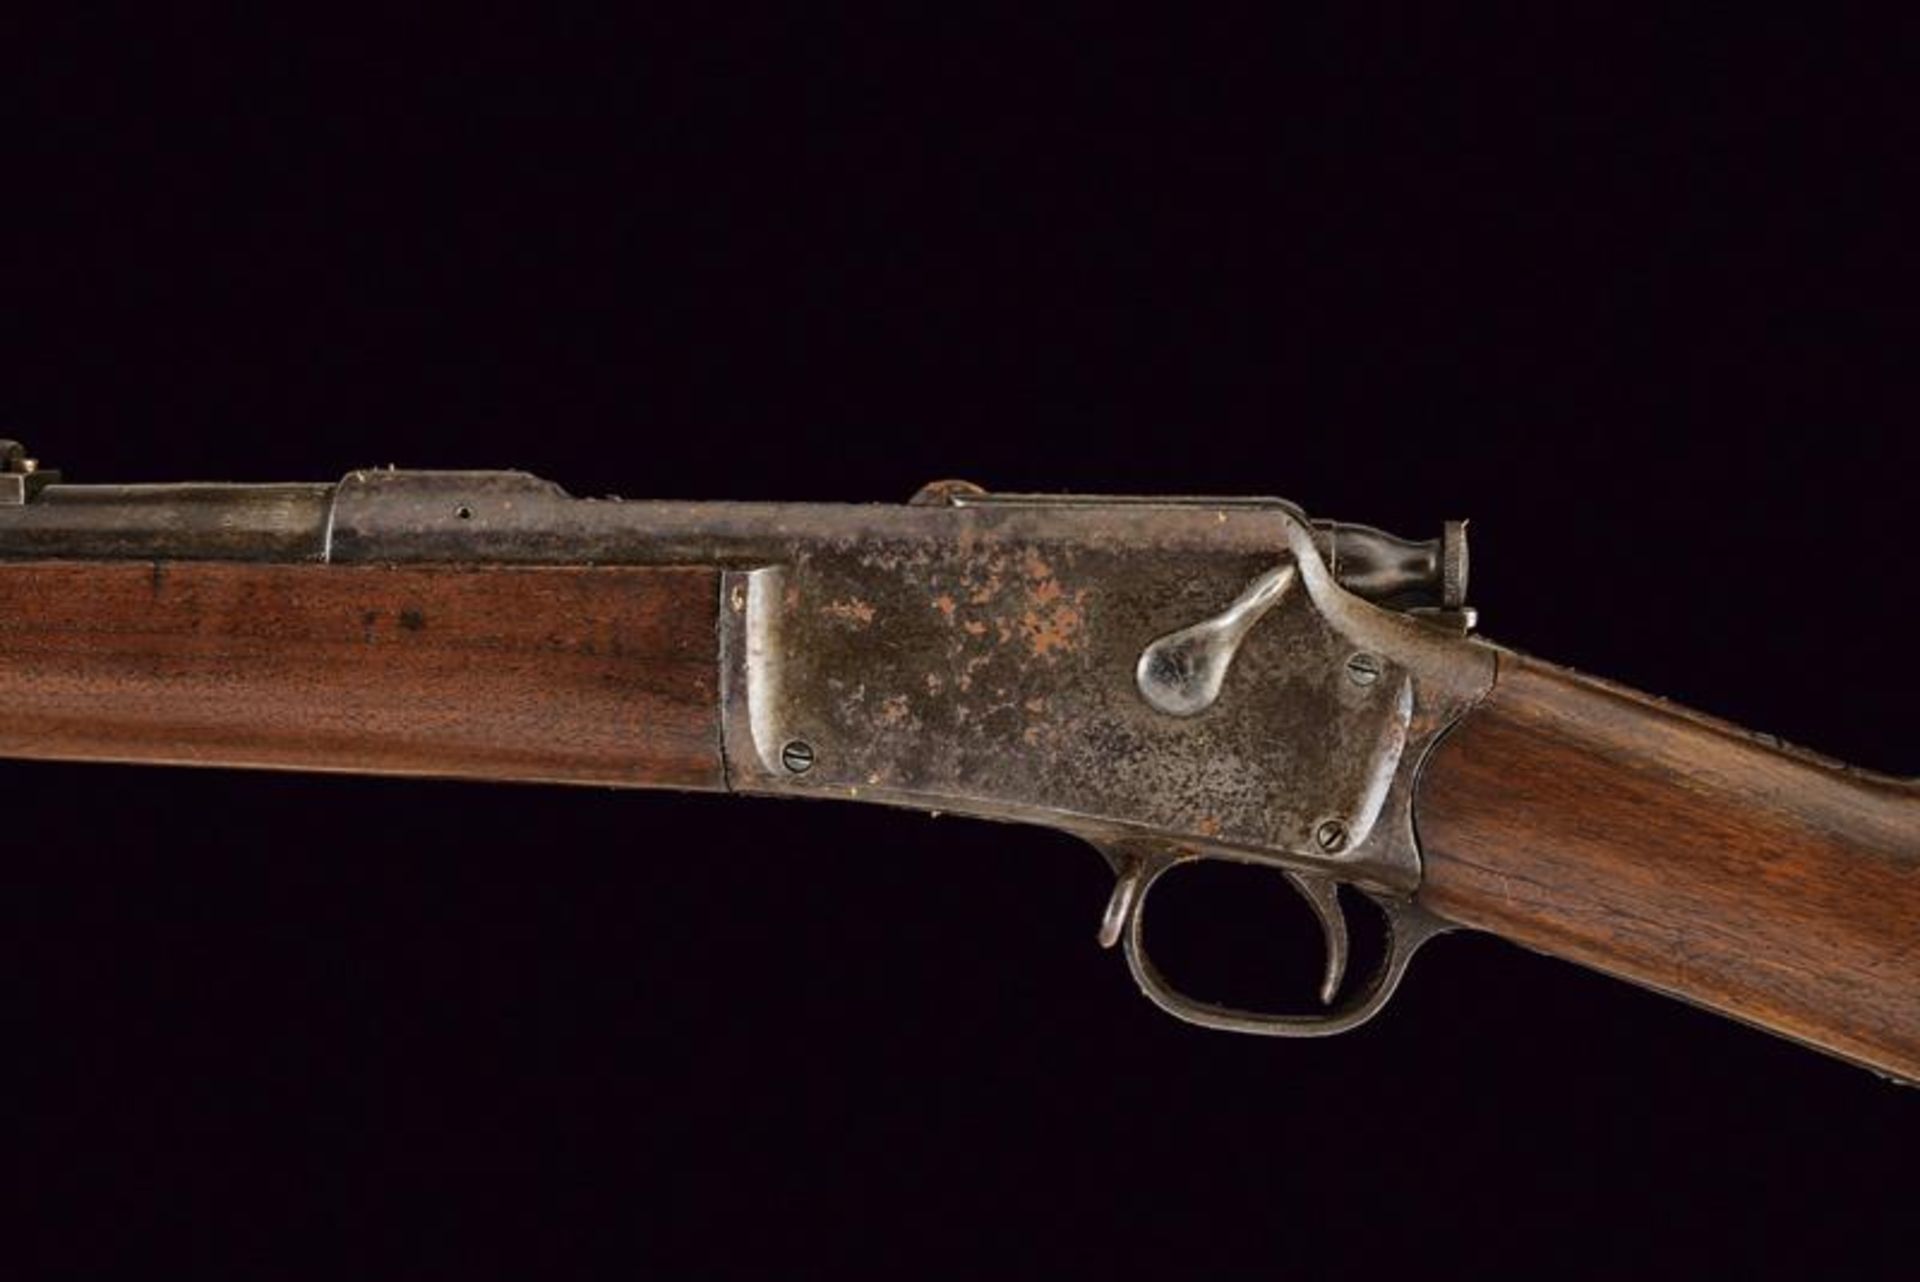 A Winchester-Hotchkiss 3rd Model Musket, 1883 Model - Image 4 of 8